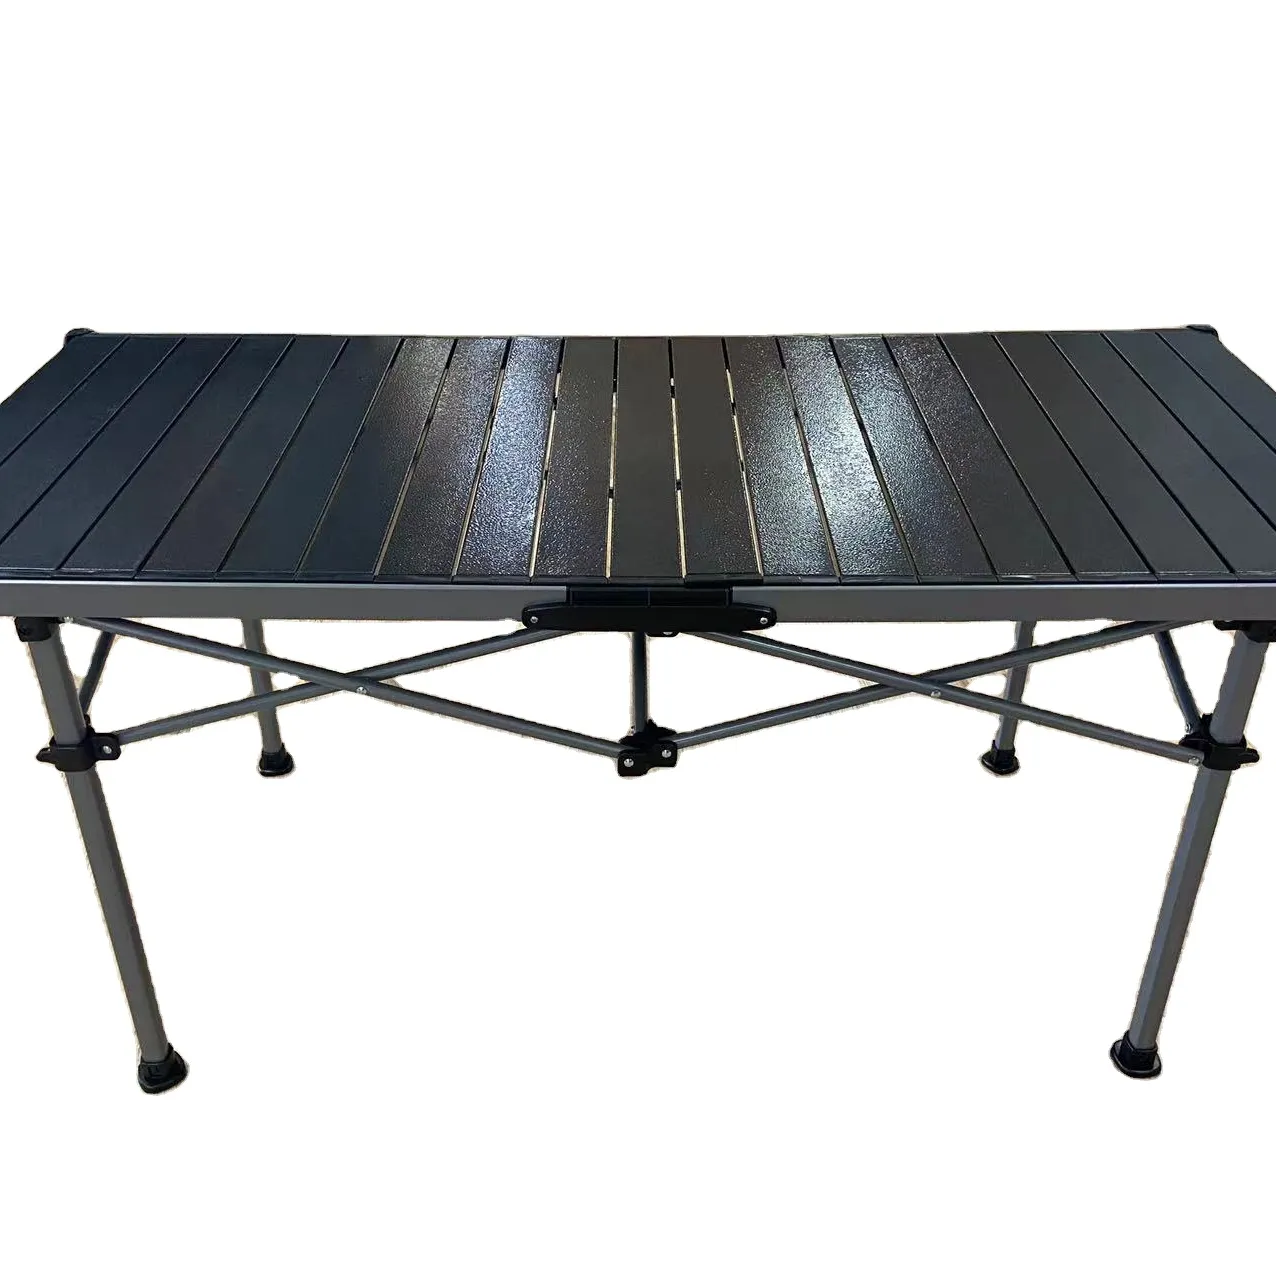 APT055 New style high quality outdoor travel folding camping table